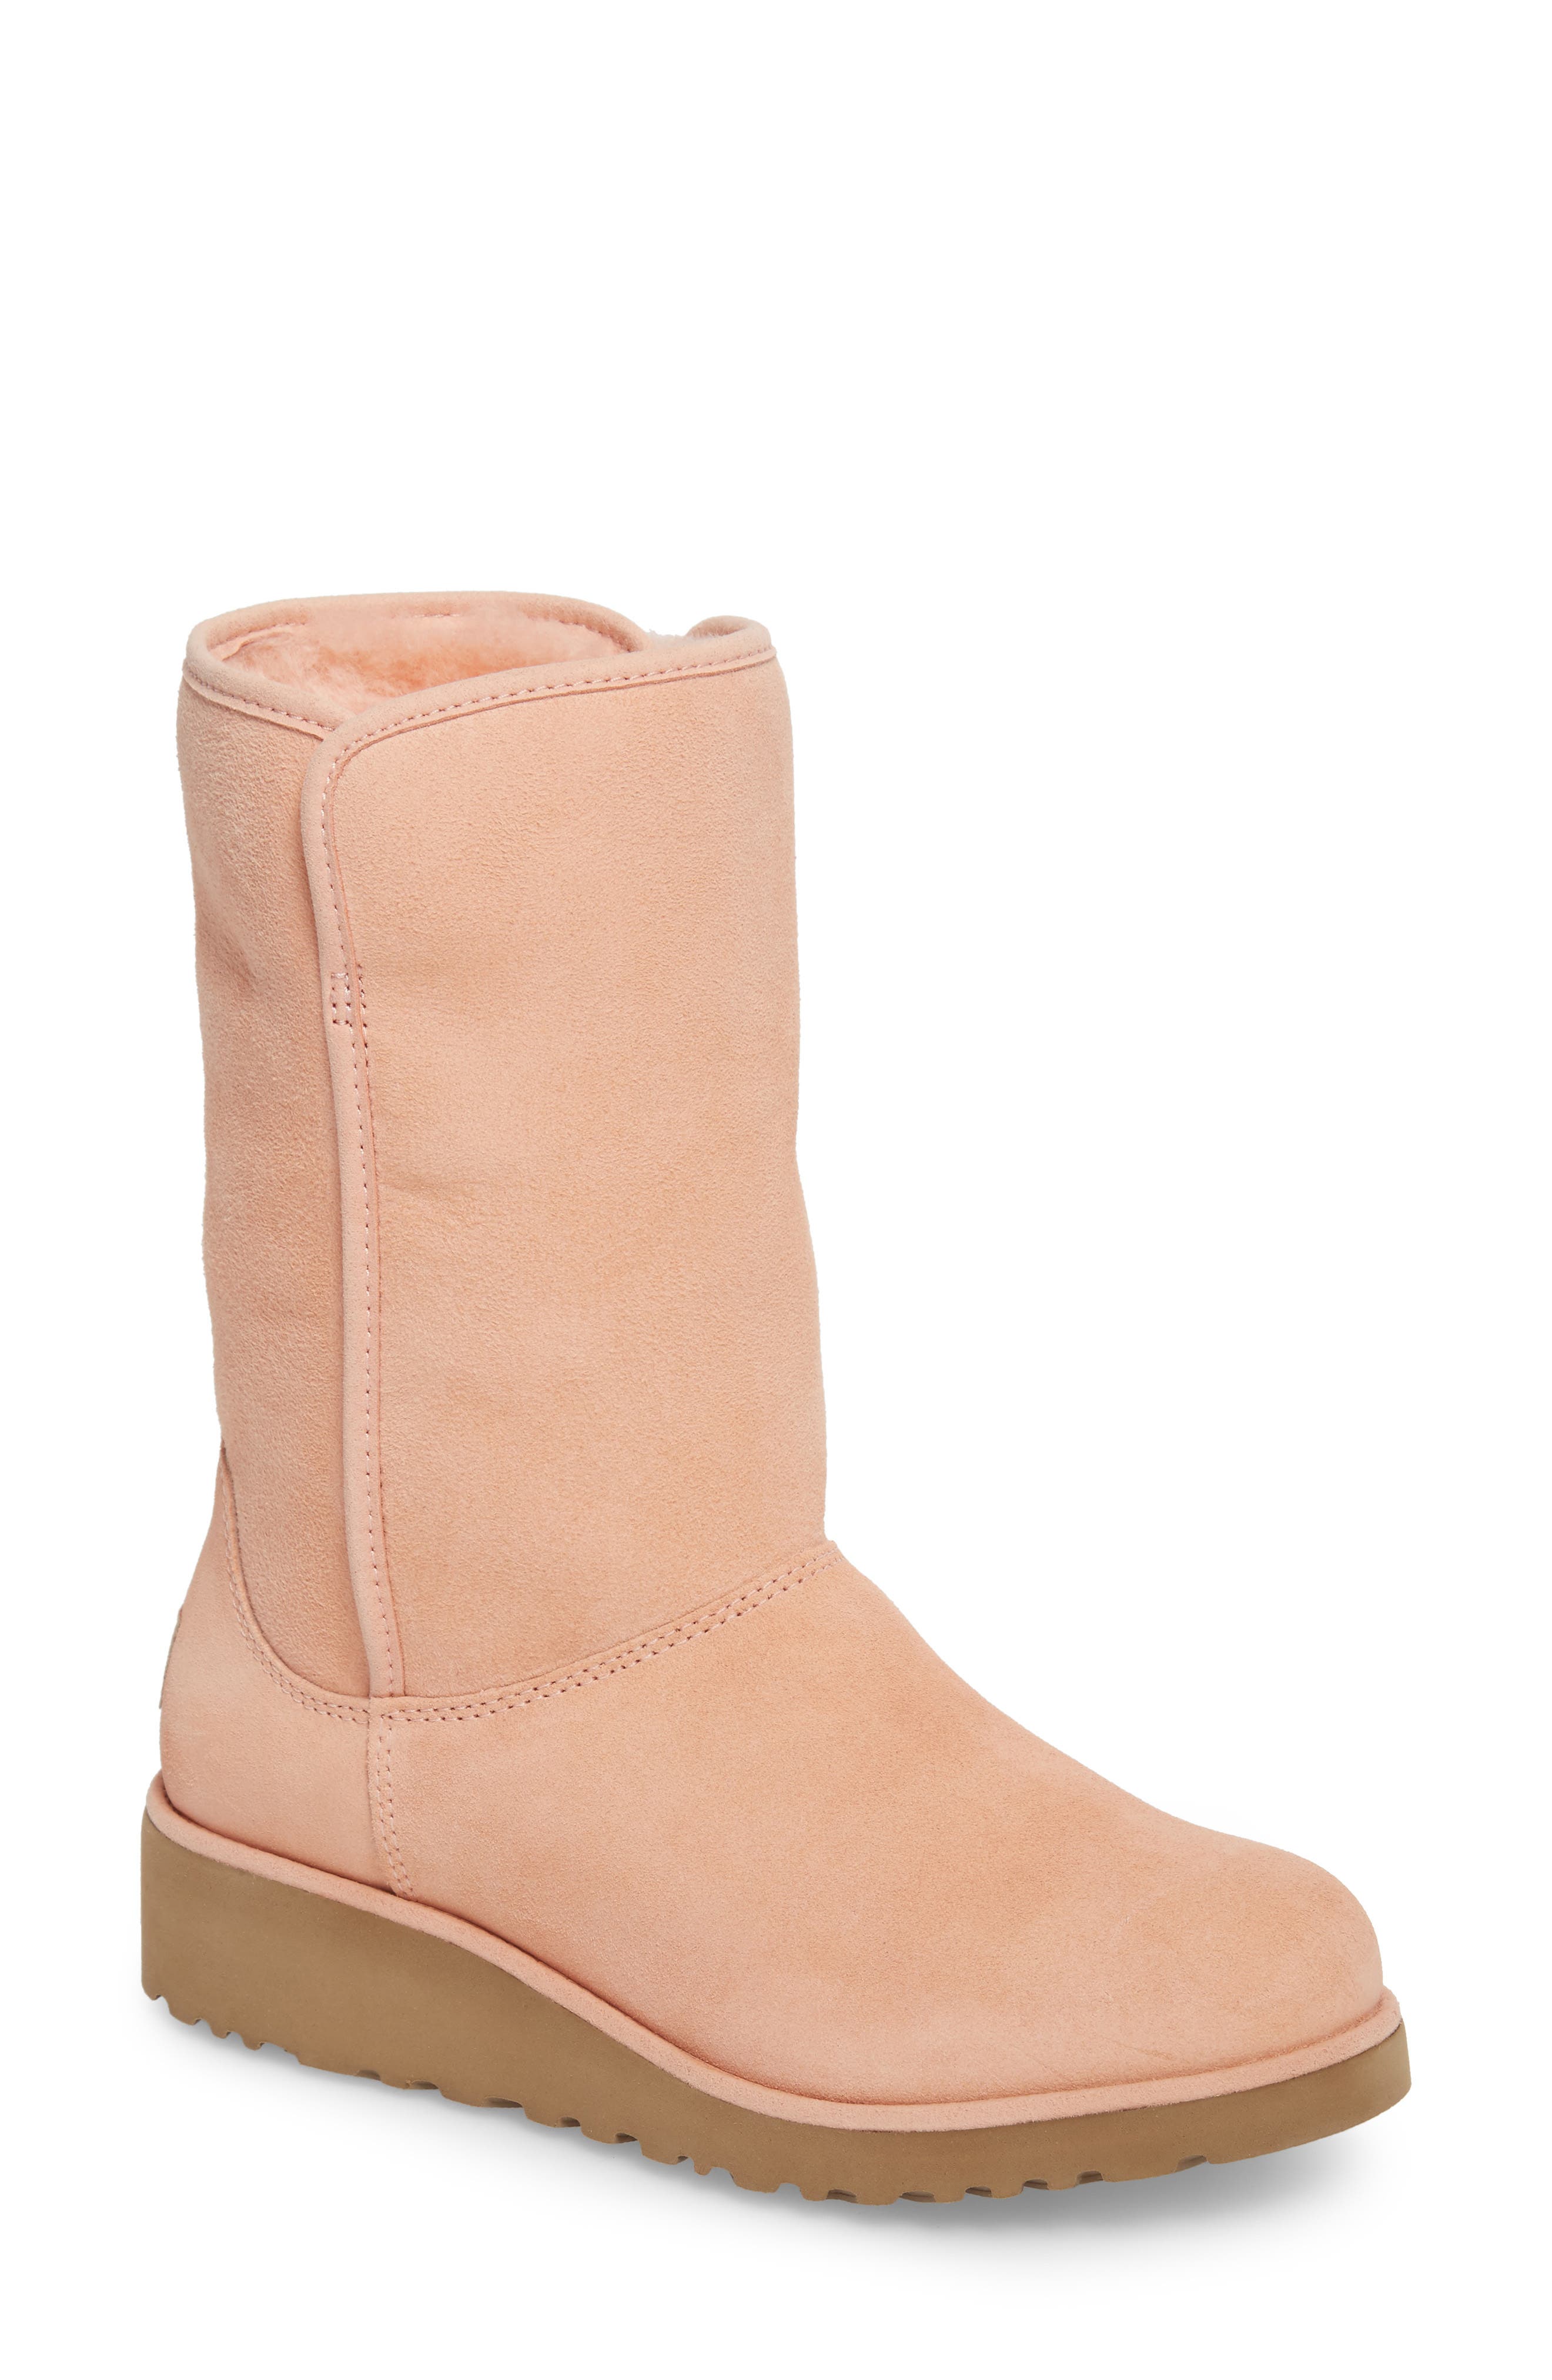 amie ugg boots review